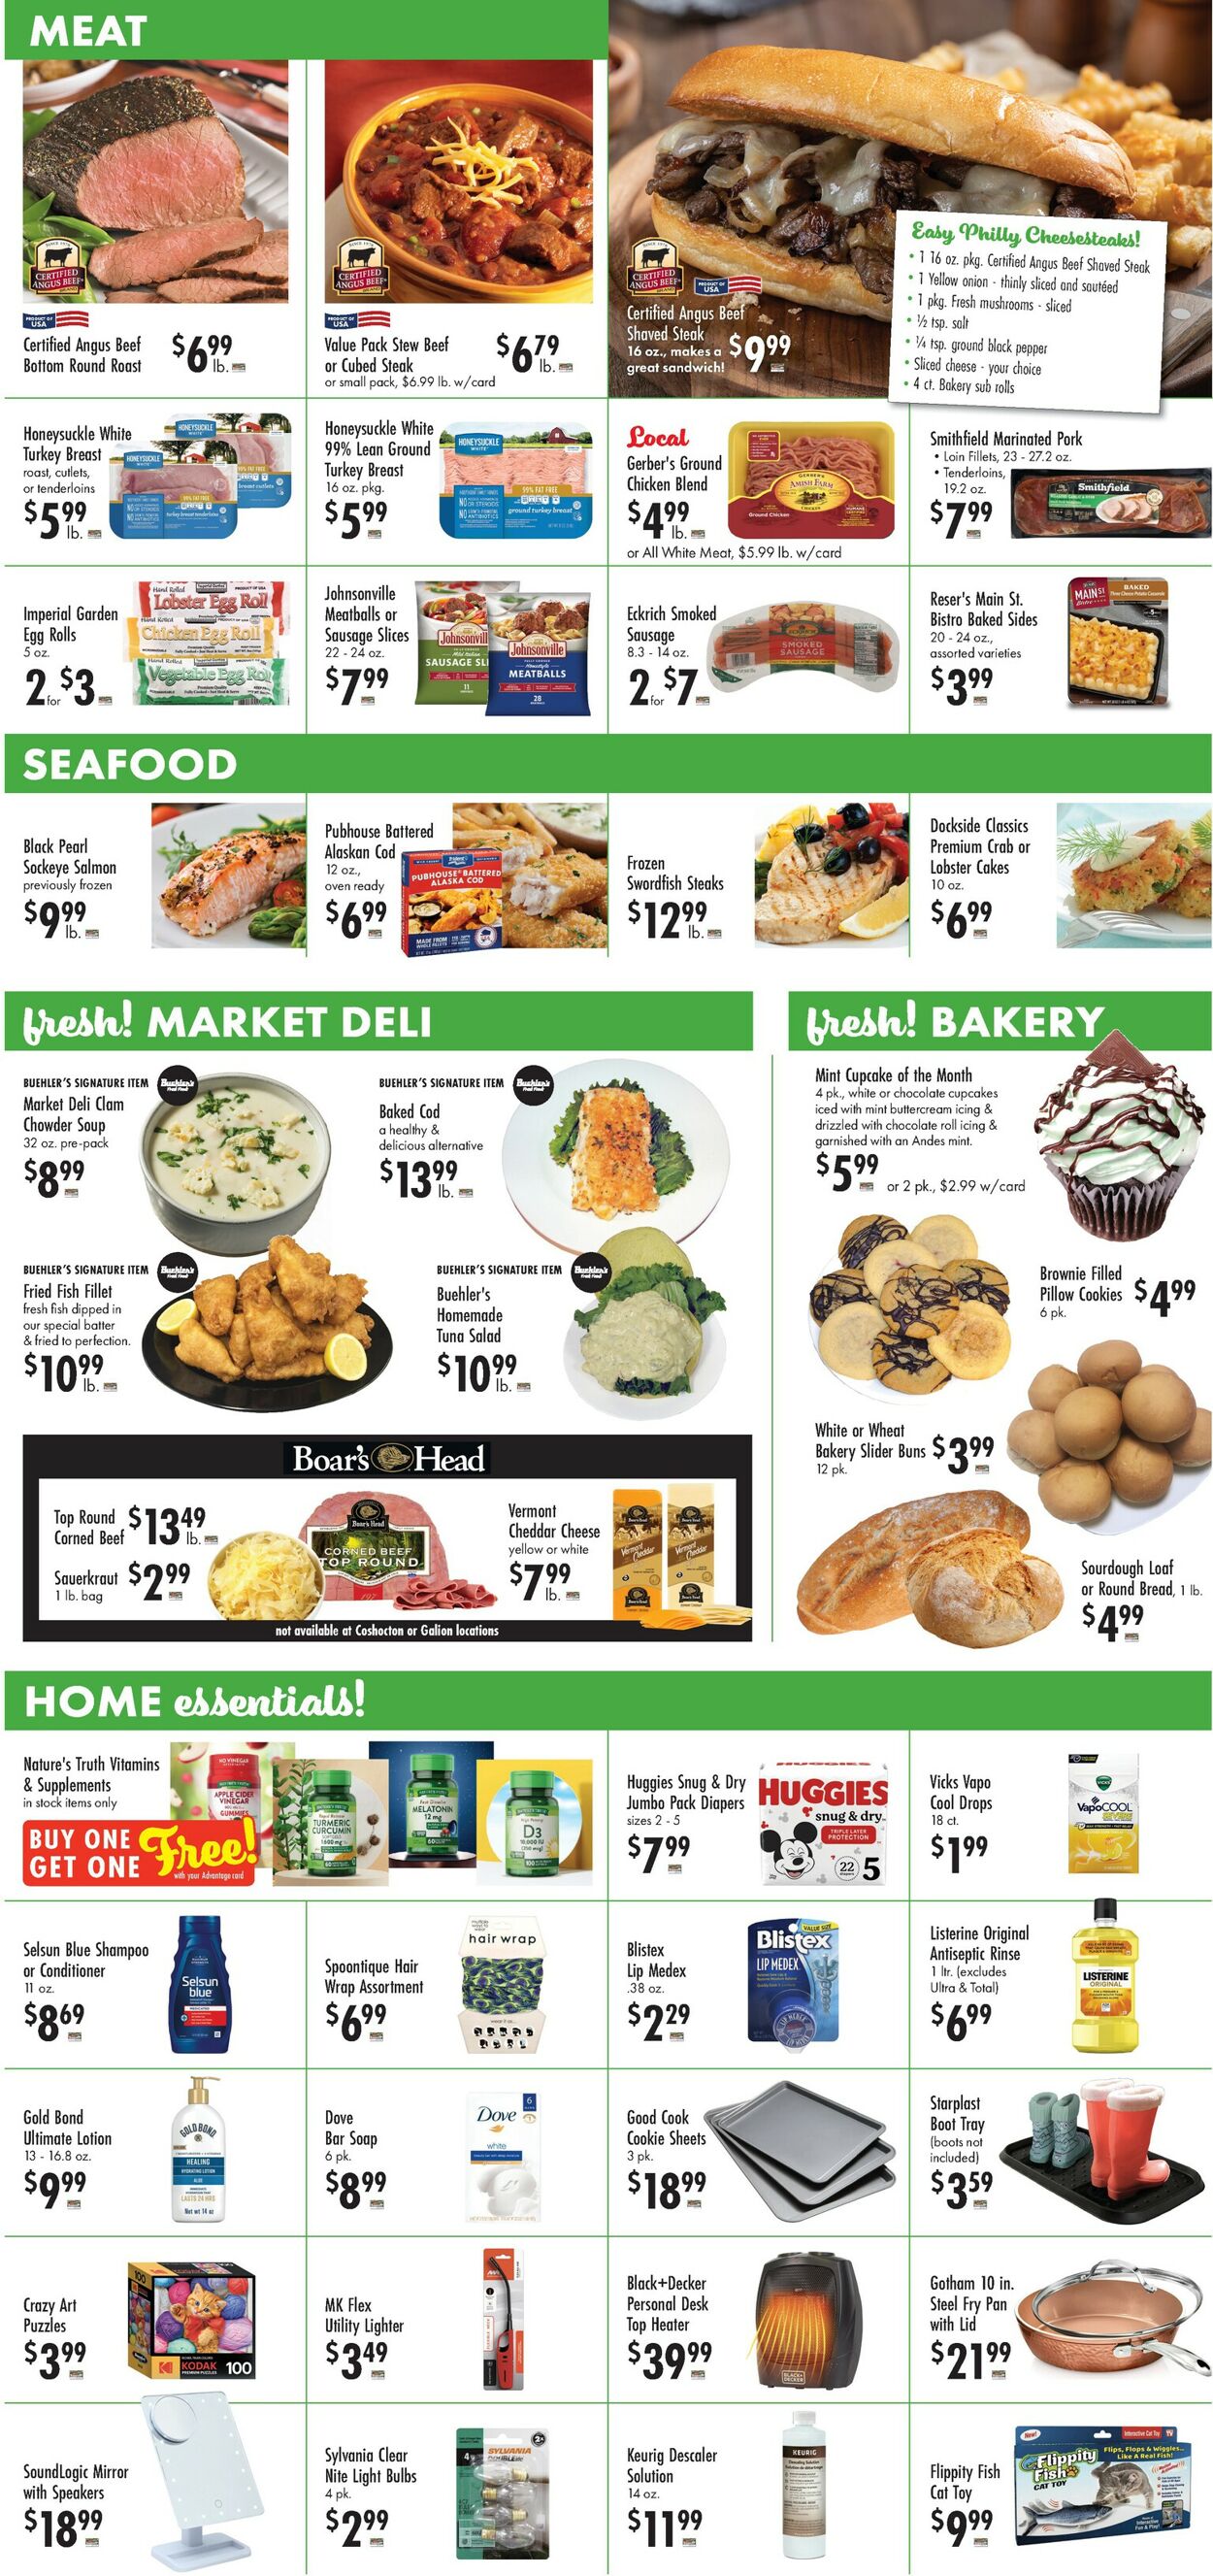 Catalogue Buehler's Fresh Foods from 03/06/2024